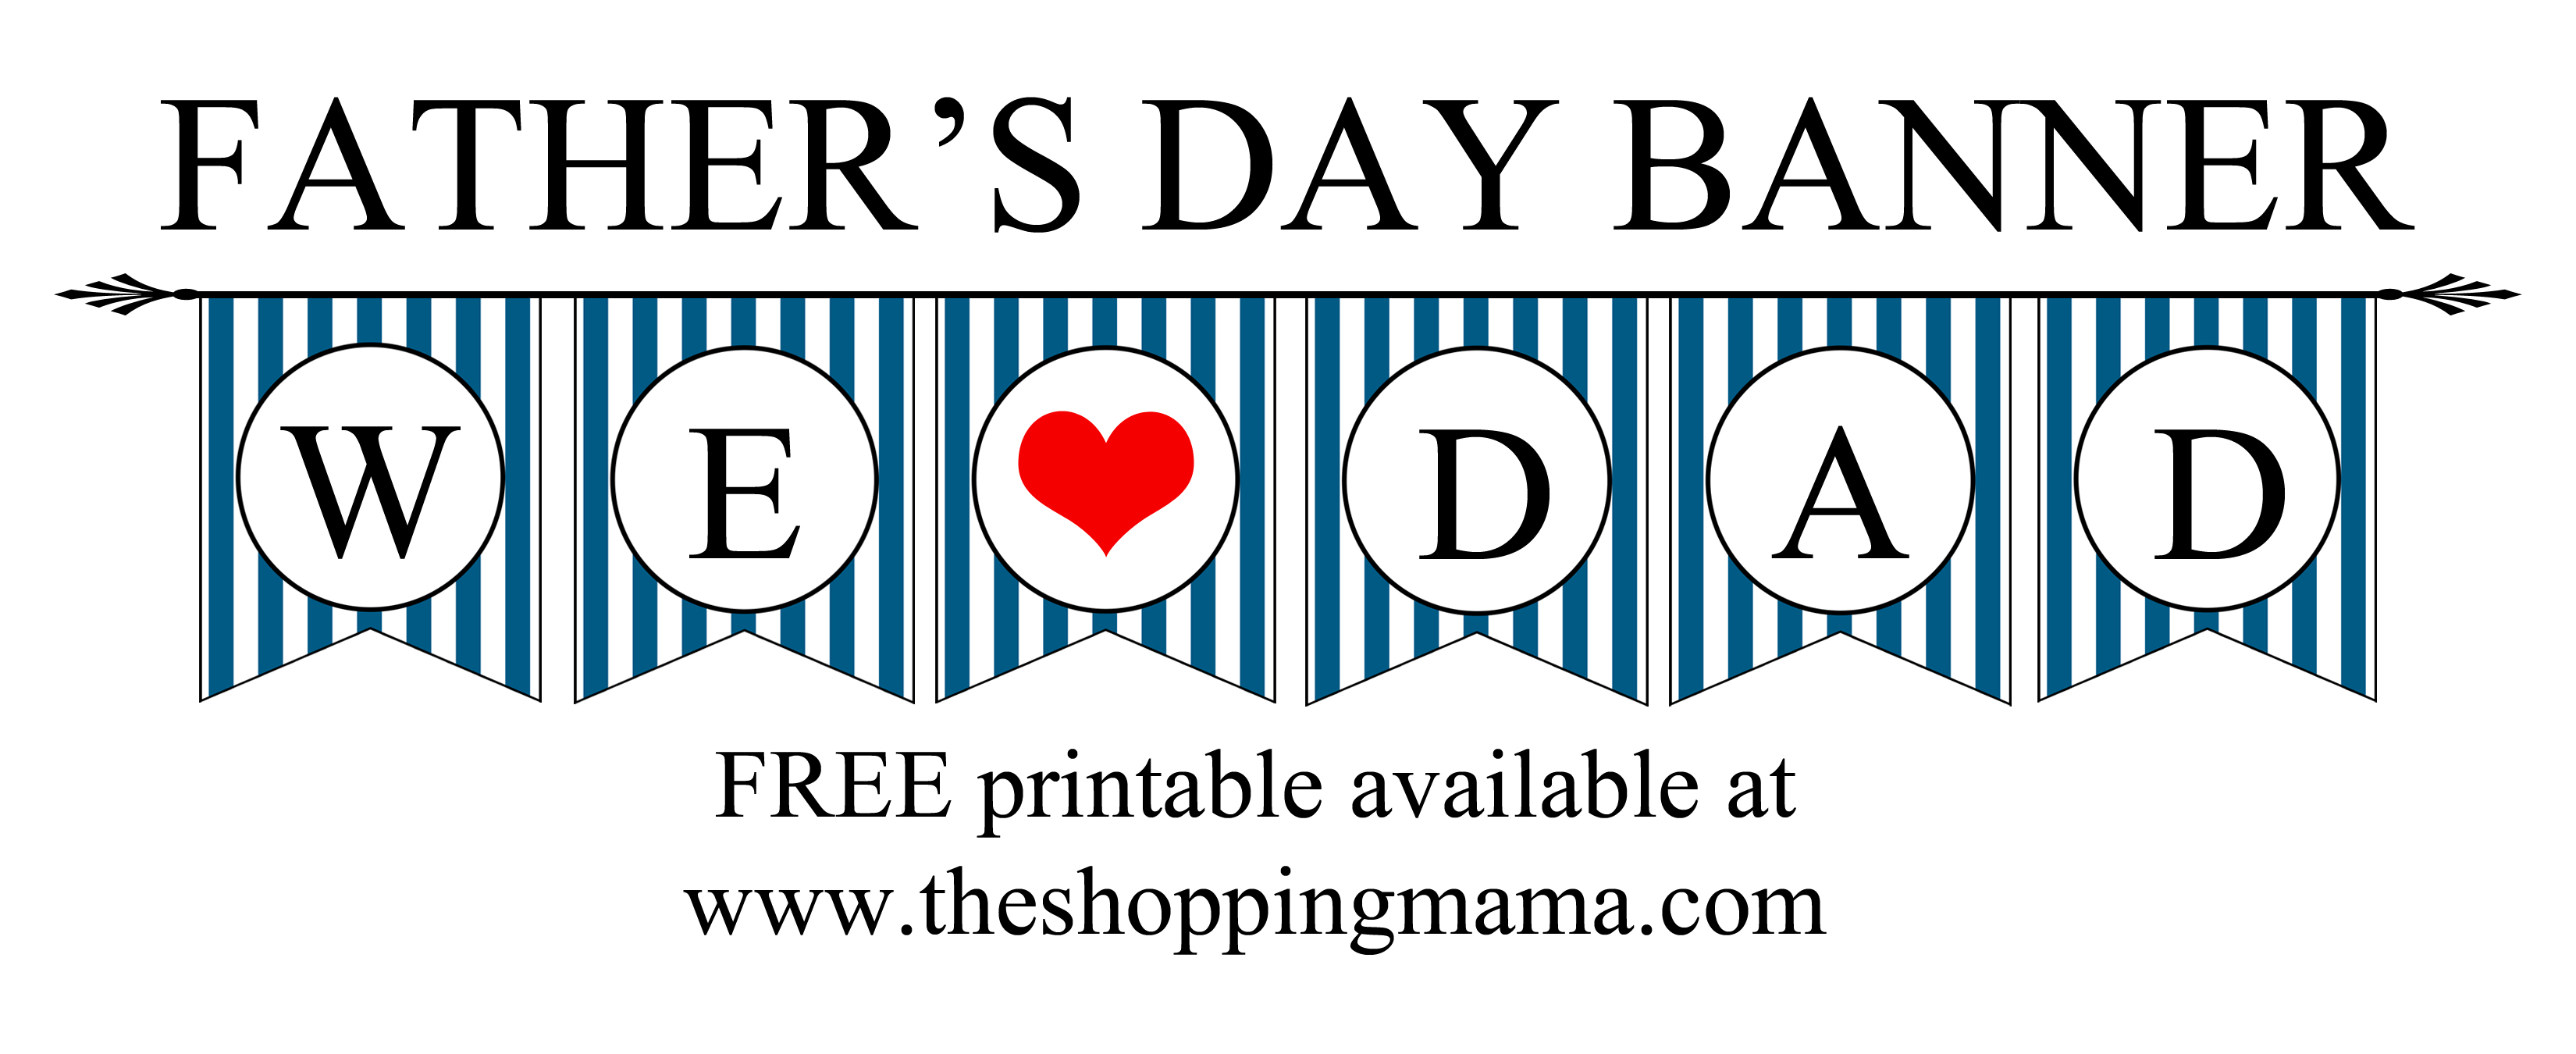 4 Best Images Of Father s Day Printable Banner Happy Father s Day